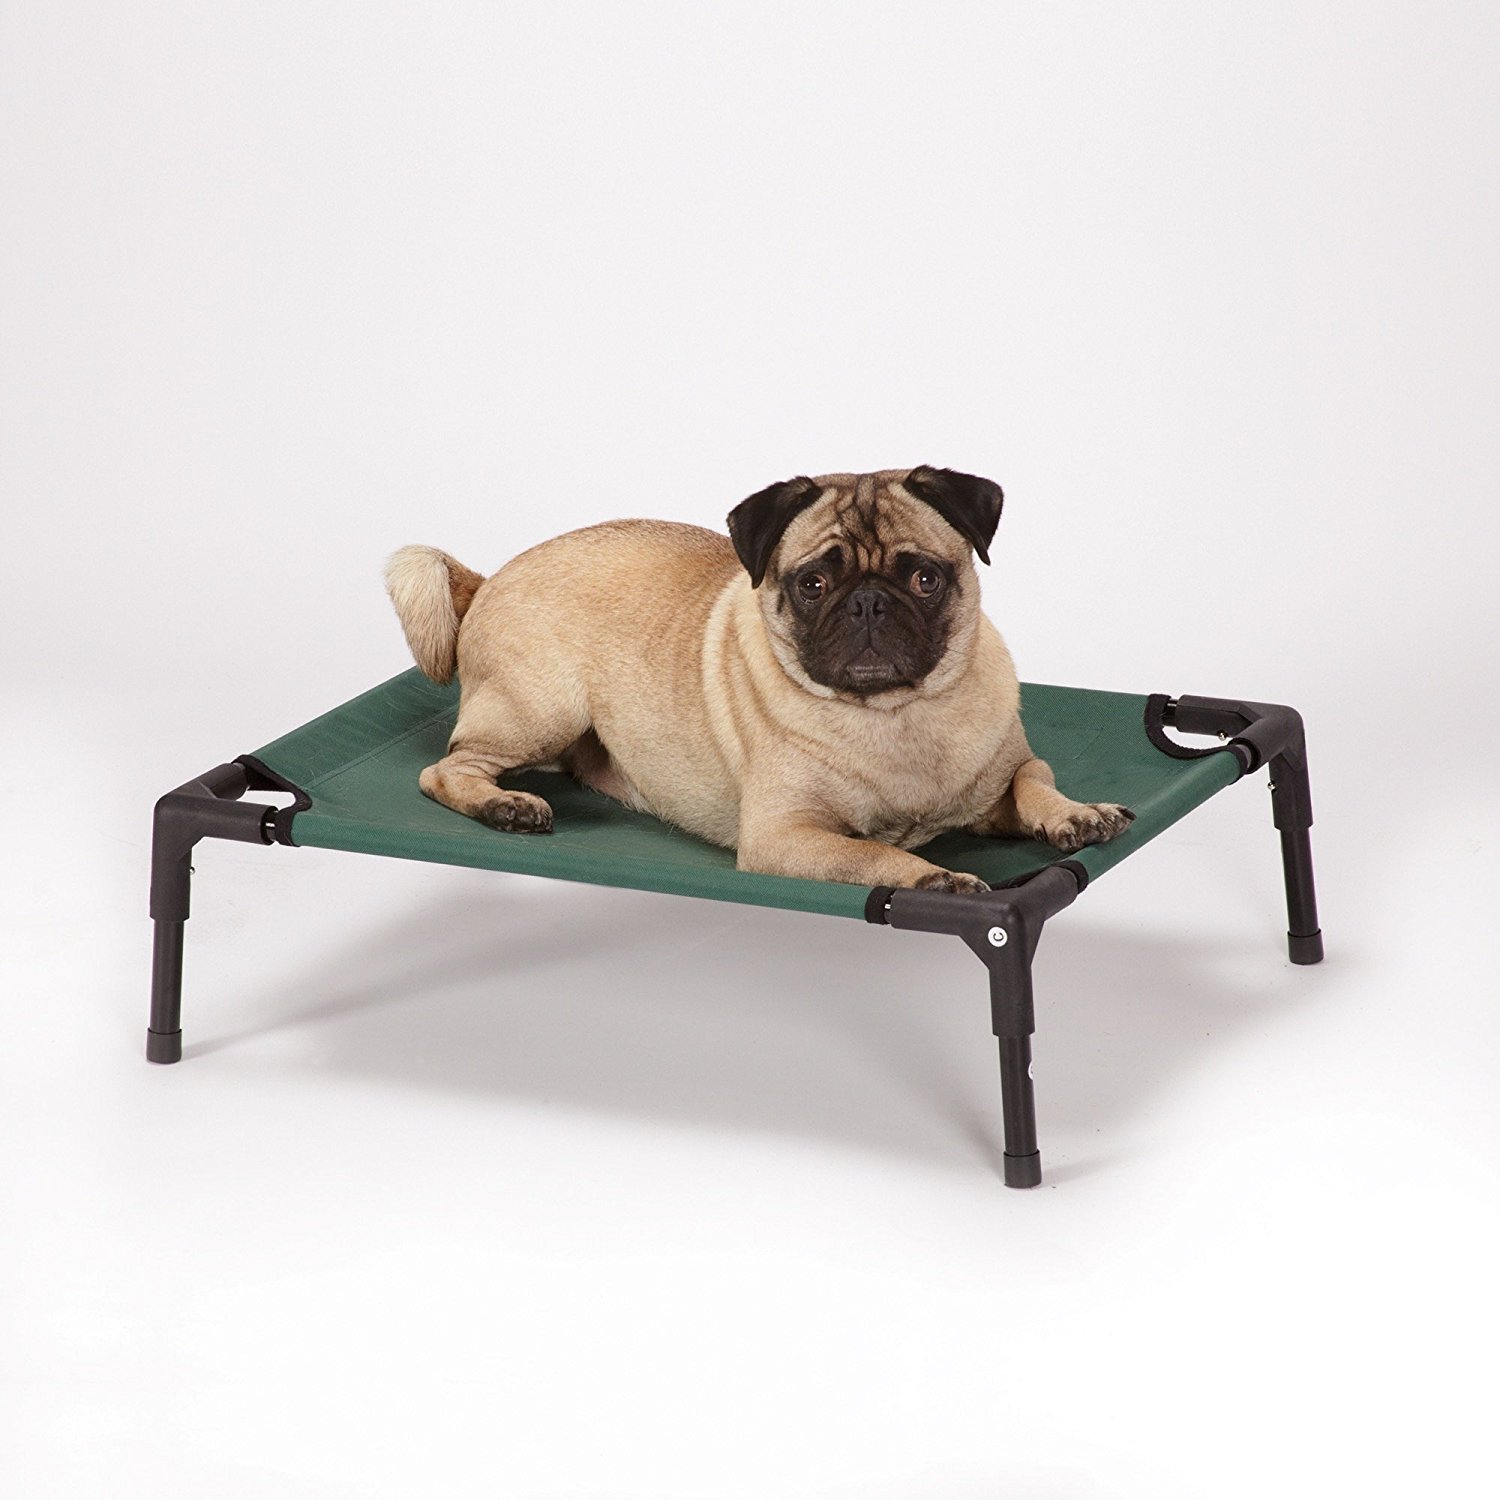 Amazon.com : Guardian Gear Elevated Dog Cot, Small : Pet Beds : Pet ...